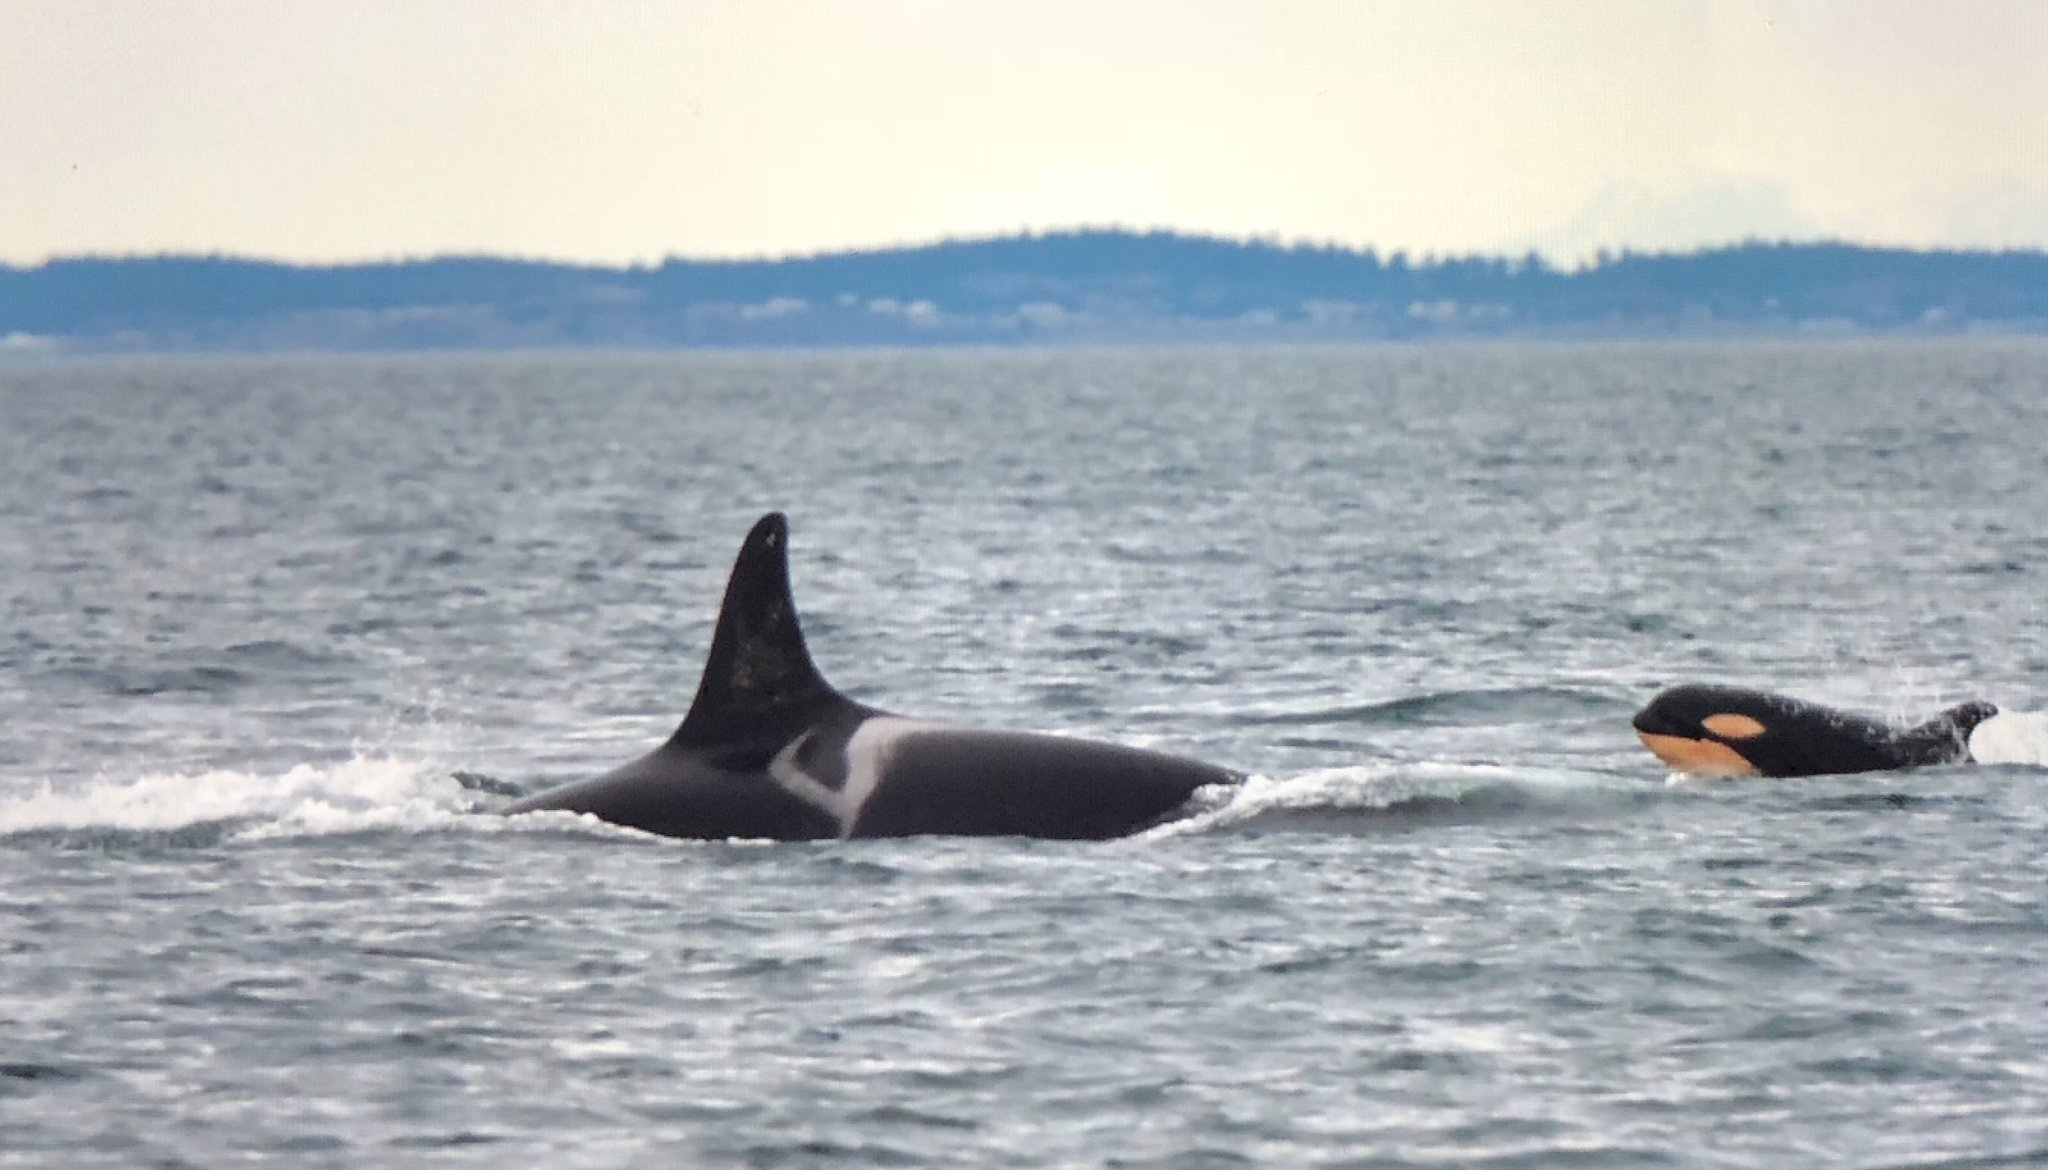 Baby orca L124 was spotted Jan. 11, 2019 with its mother, L77. CREDIT: CENTER FOR WHALE RESEARCH